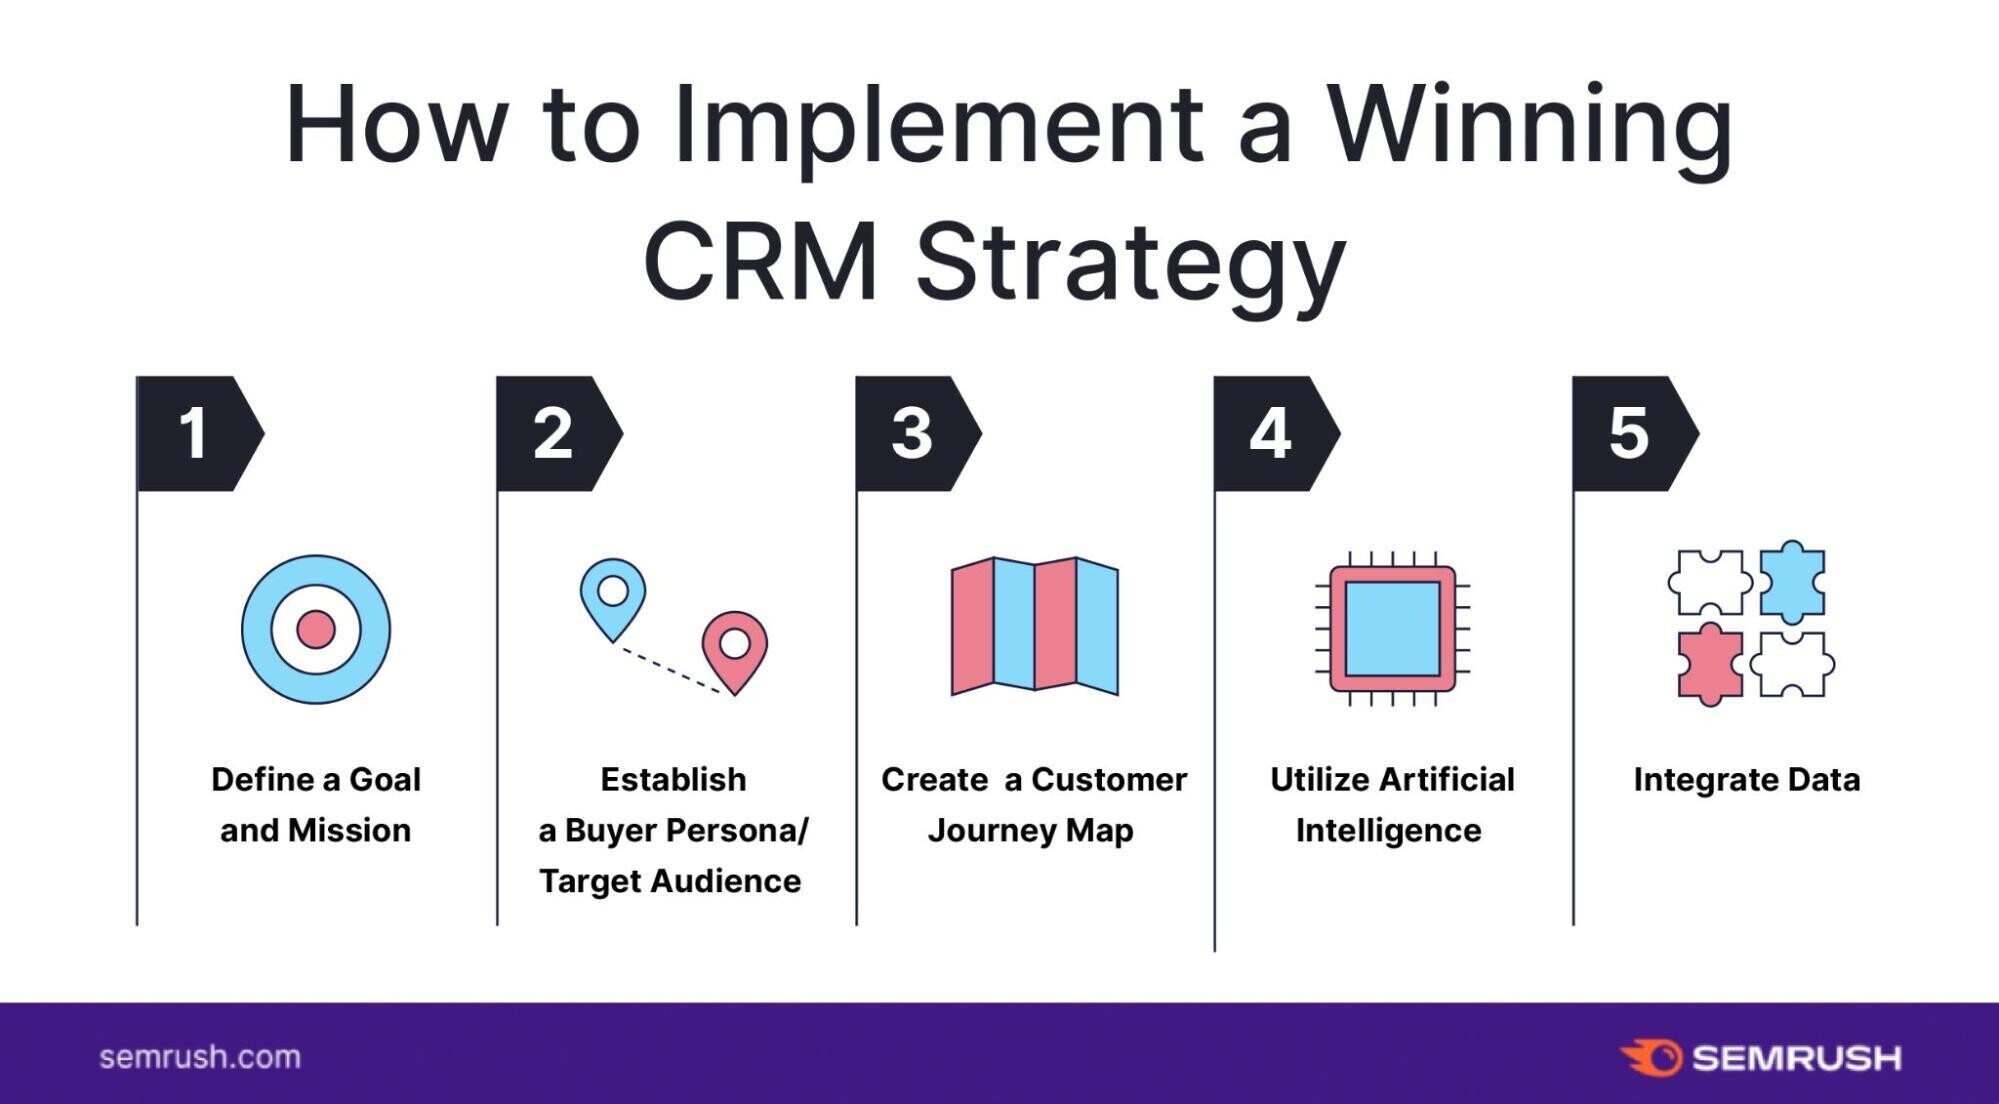 Chart showing five steps to implement a winning CRM strategy, which include defining a goal, establishing a buyer persona, creating a customer journey map, utilizing AI, and integrating data. 